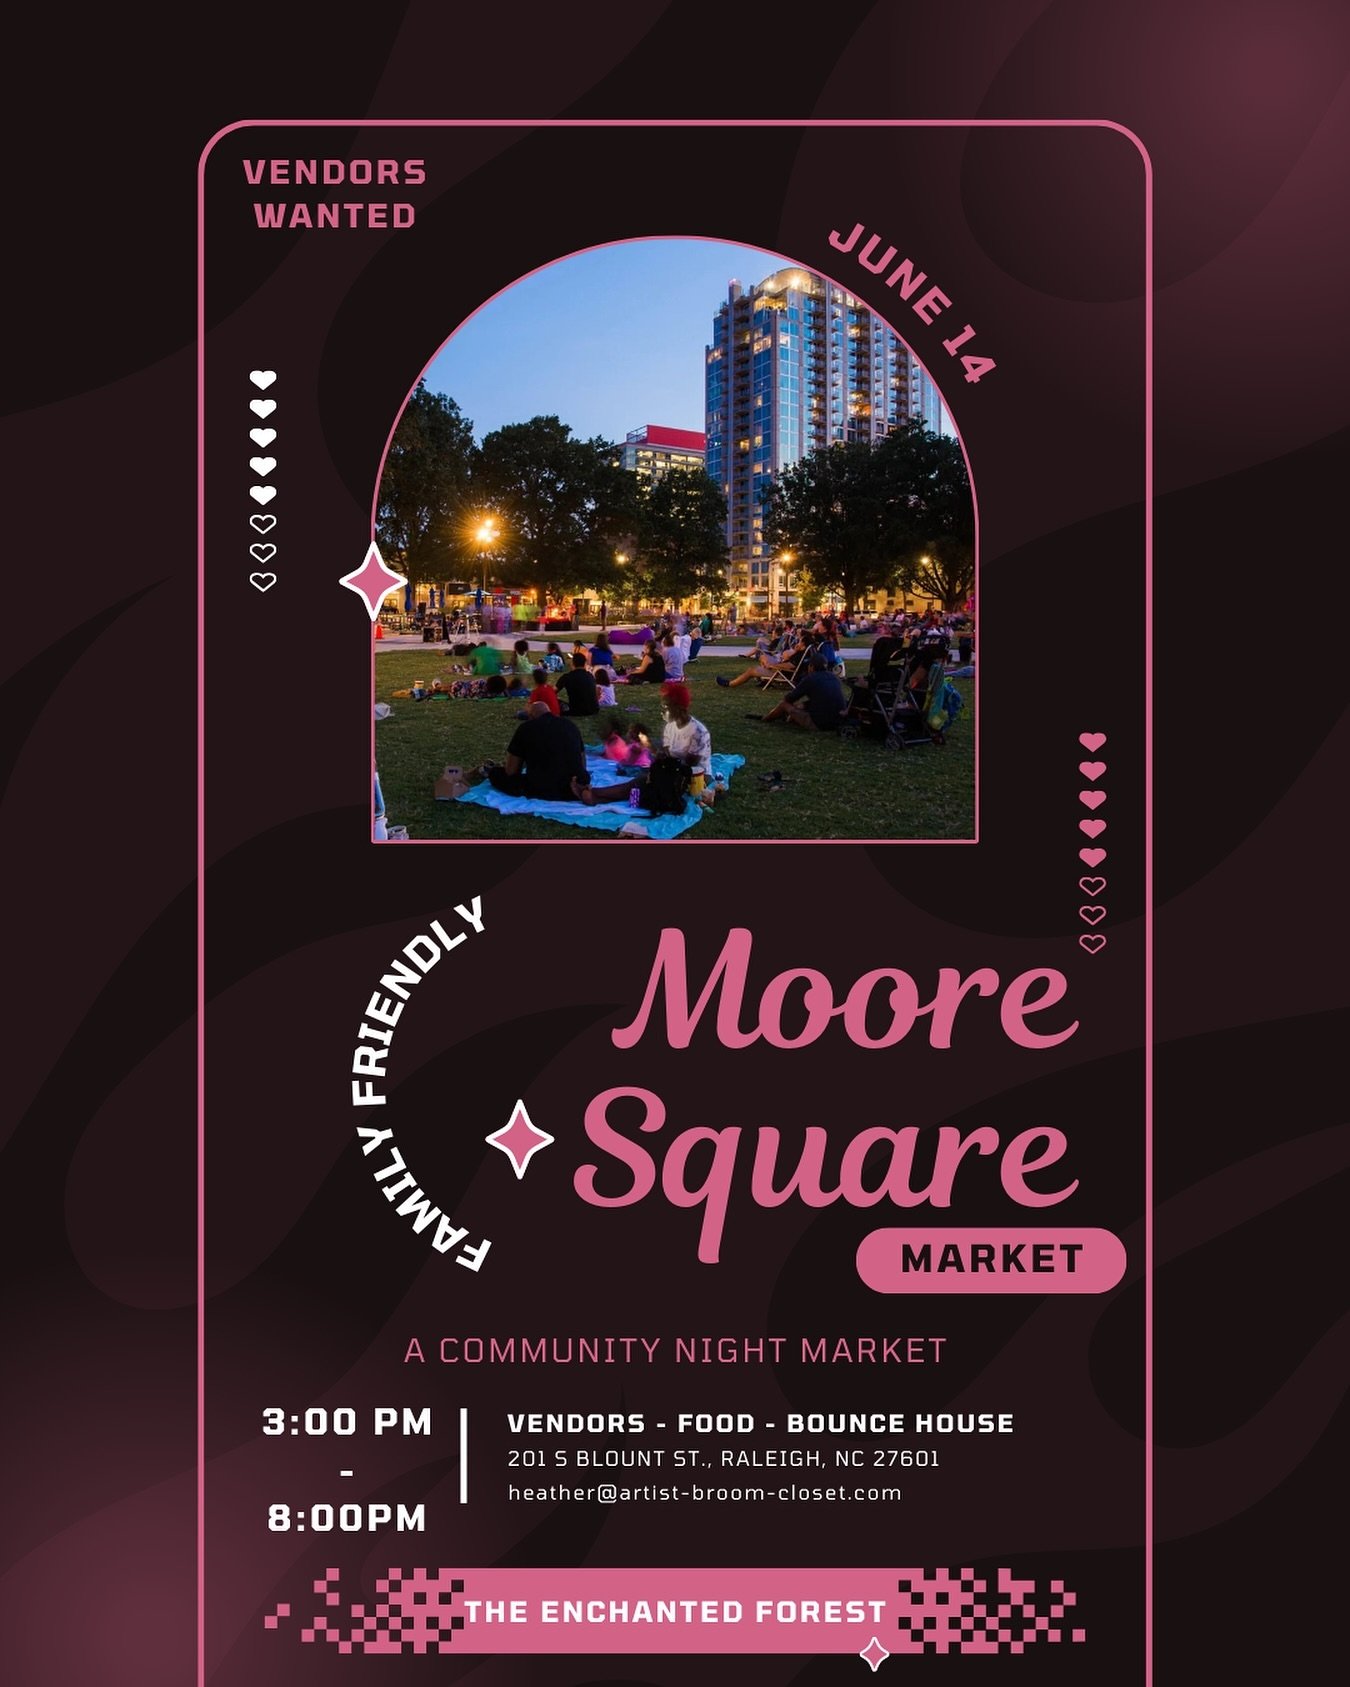 Moore Square Market 💖

Come join us for a night of fun in the heart of Raleigh

Support local businesses, visit our food trucks, and jump in the bounce house 🏰

- - - - - - - -

We&rsquo;re still accepting vendors! Please DM me for more information